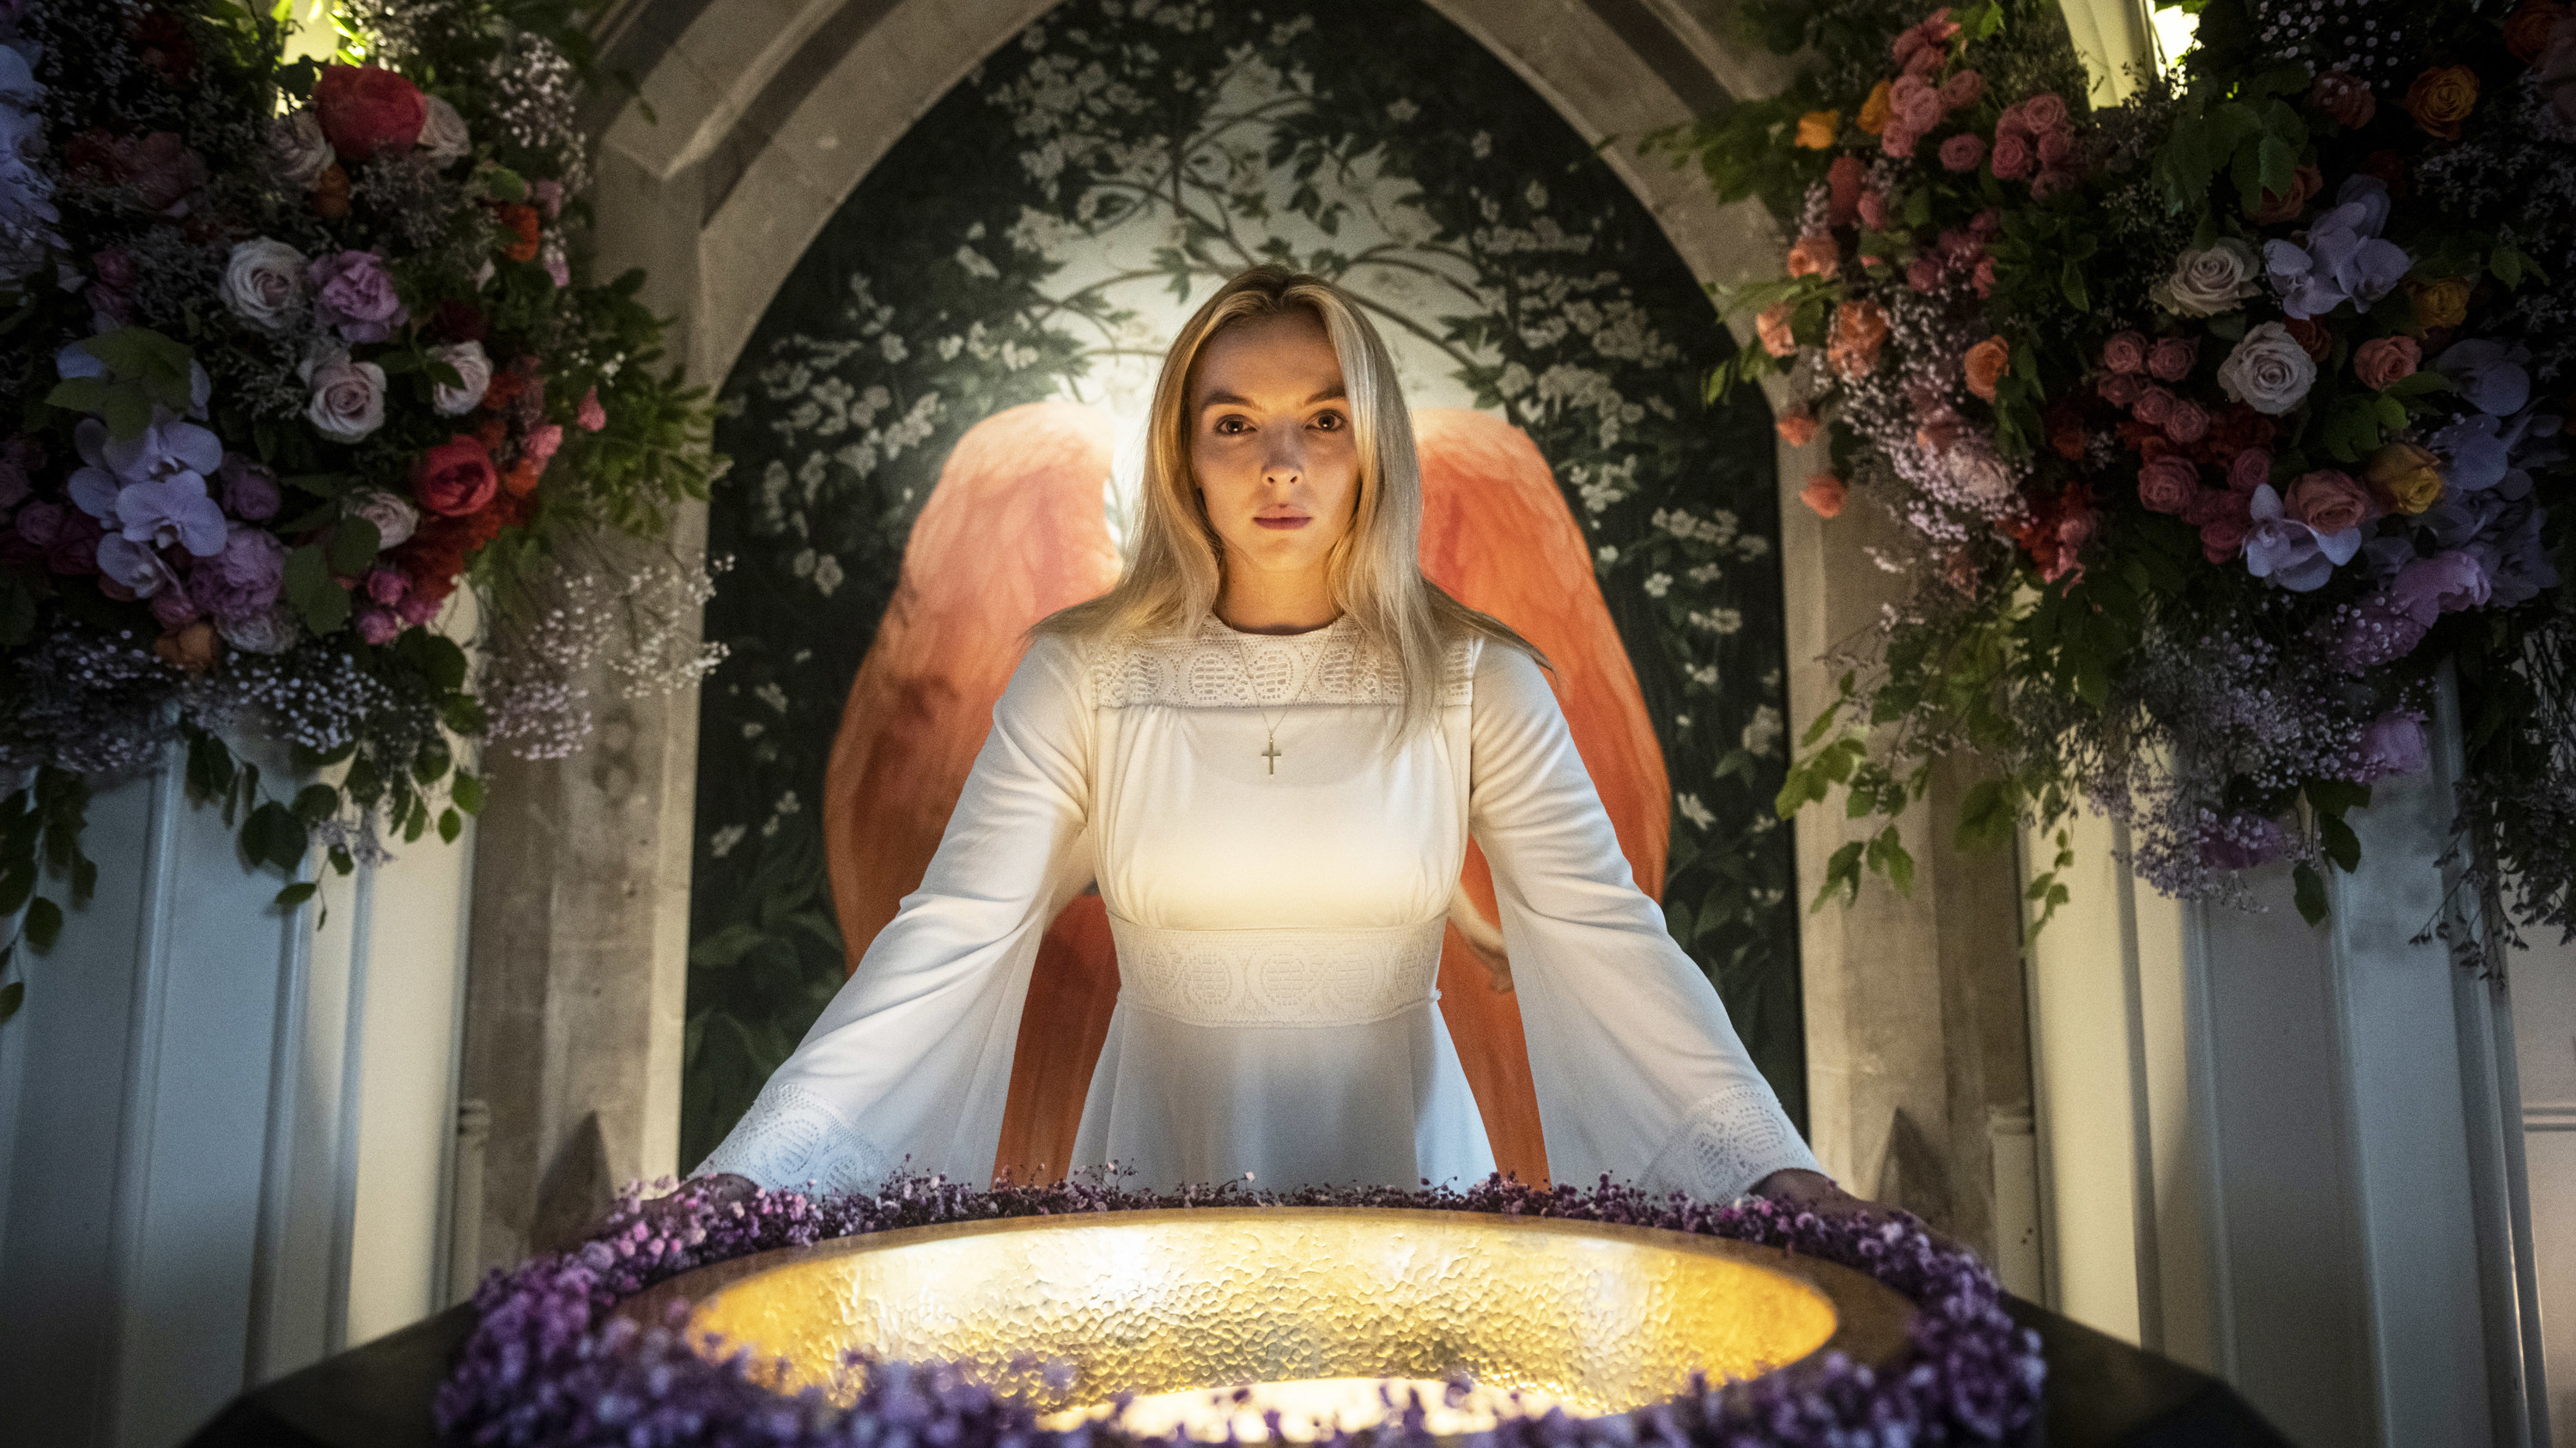 Villanelle looking ethereal as she stands at an alter